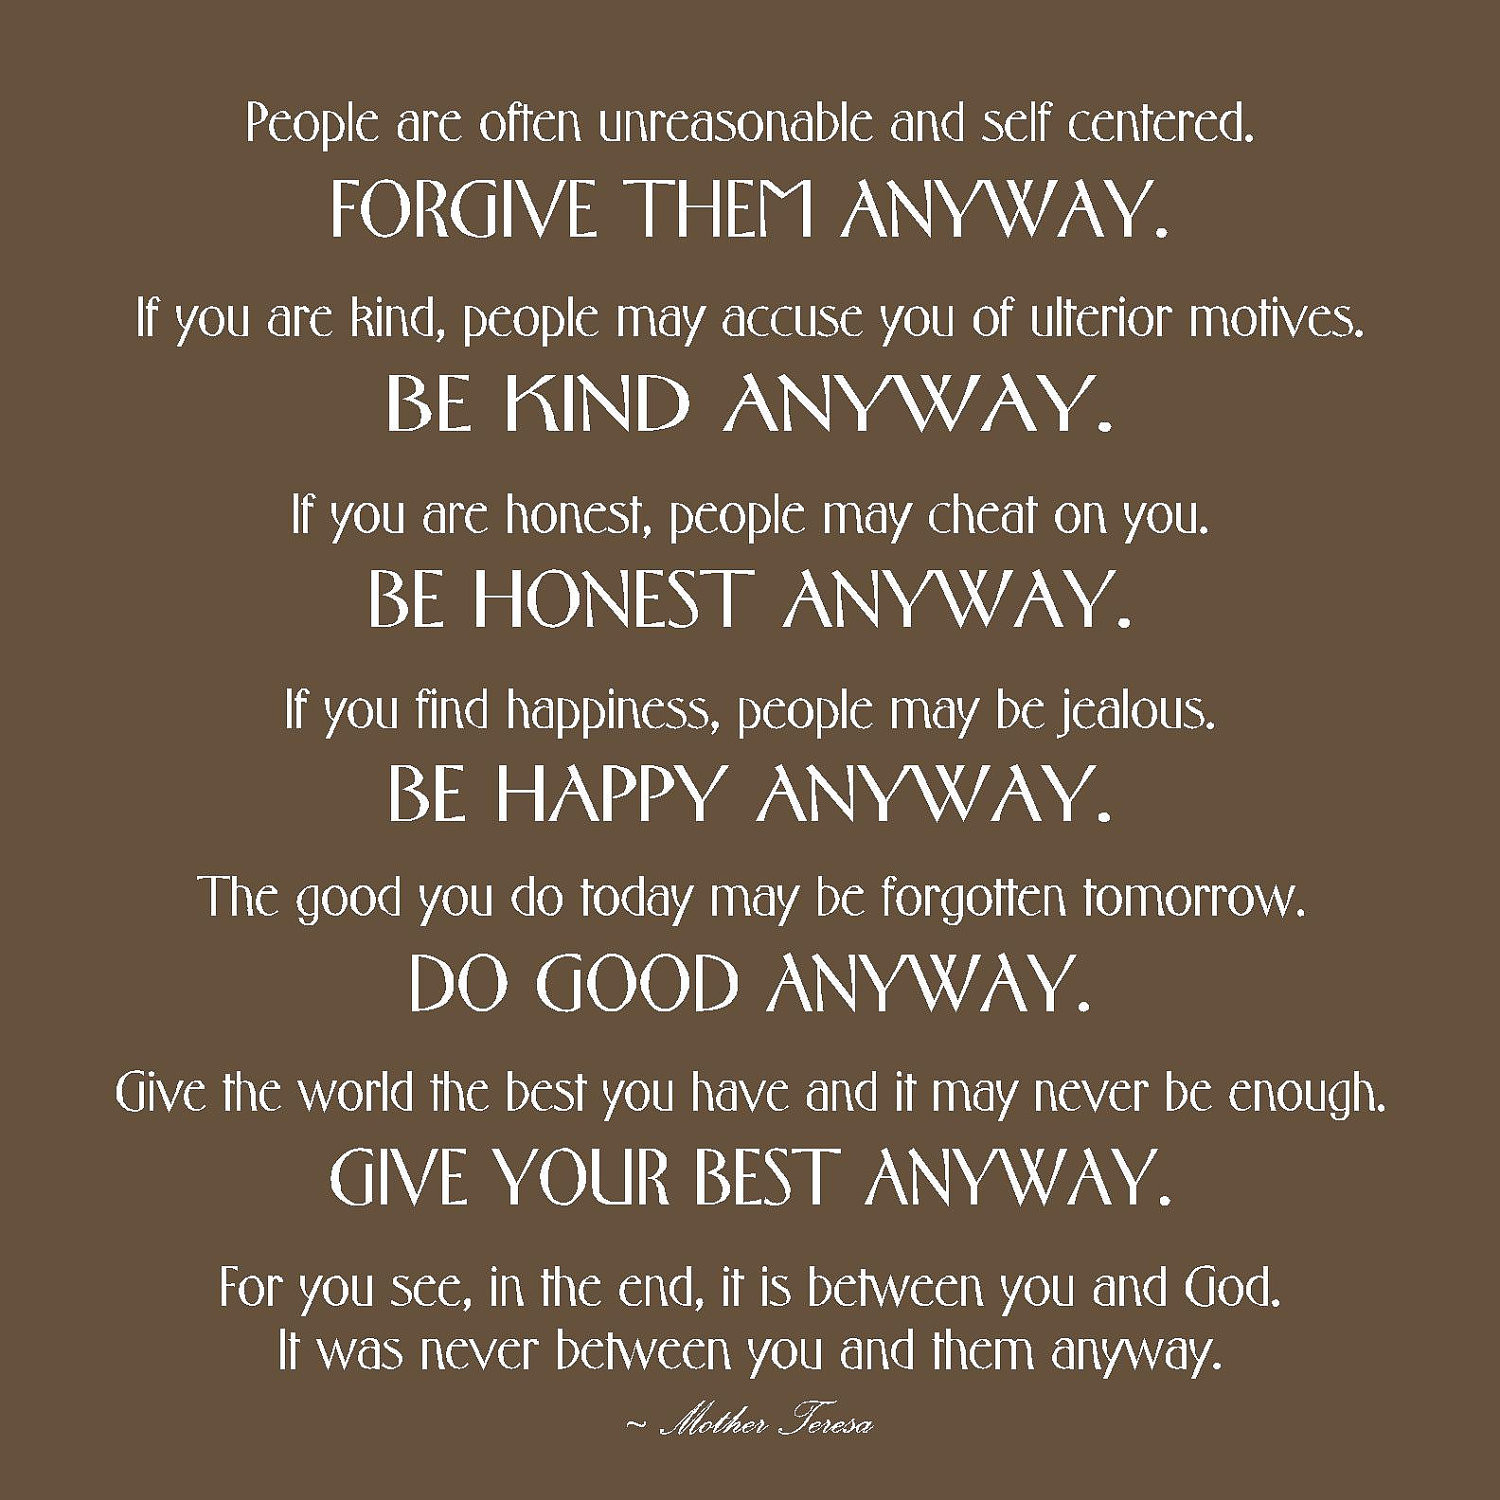 Mother Teresa Quotes About Life
 Lessons in Life by Mother Teresa